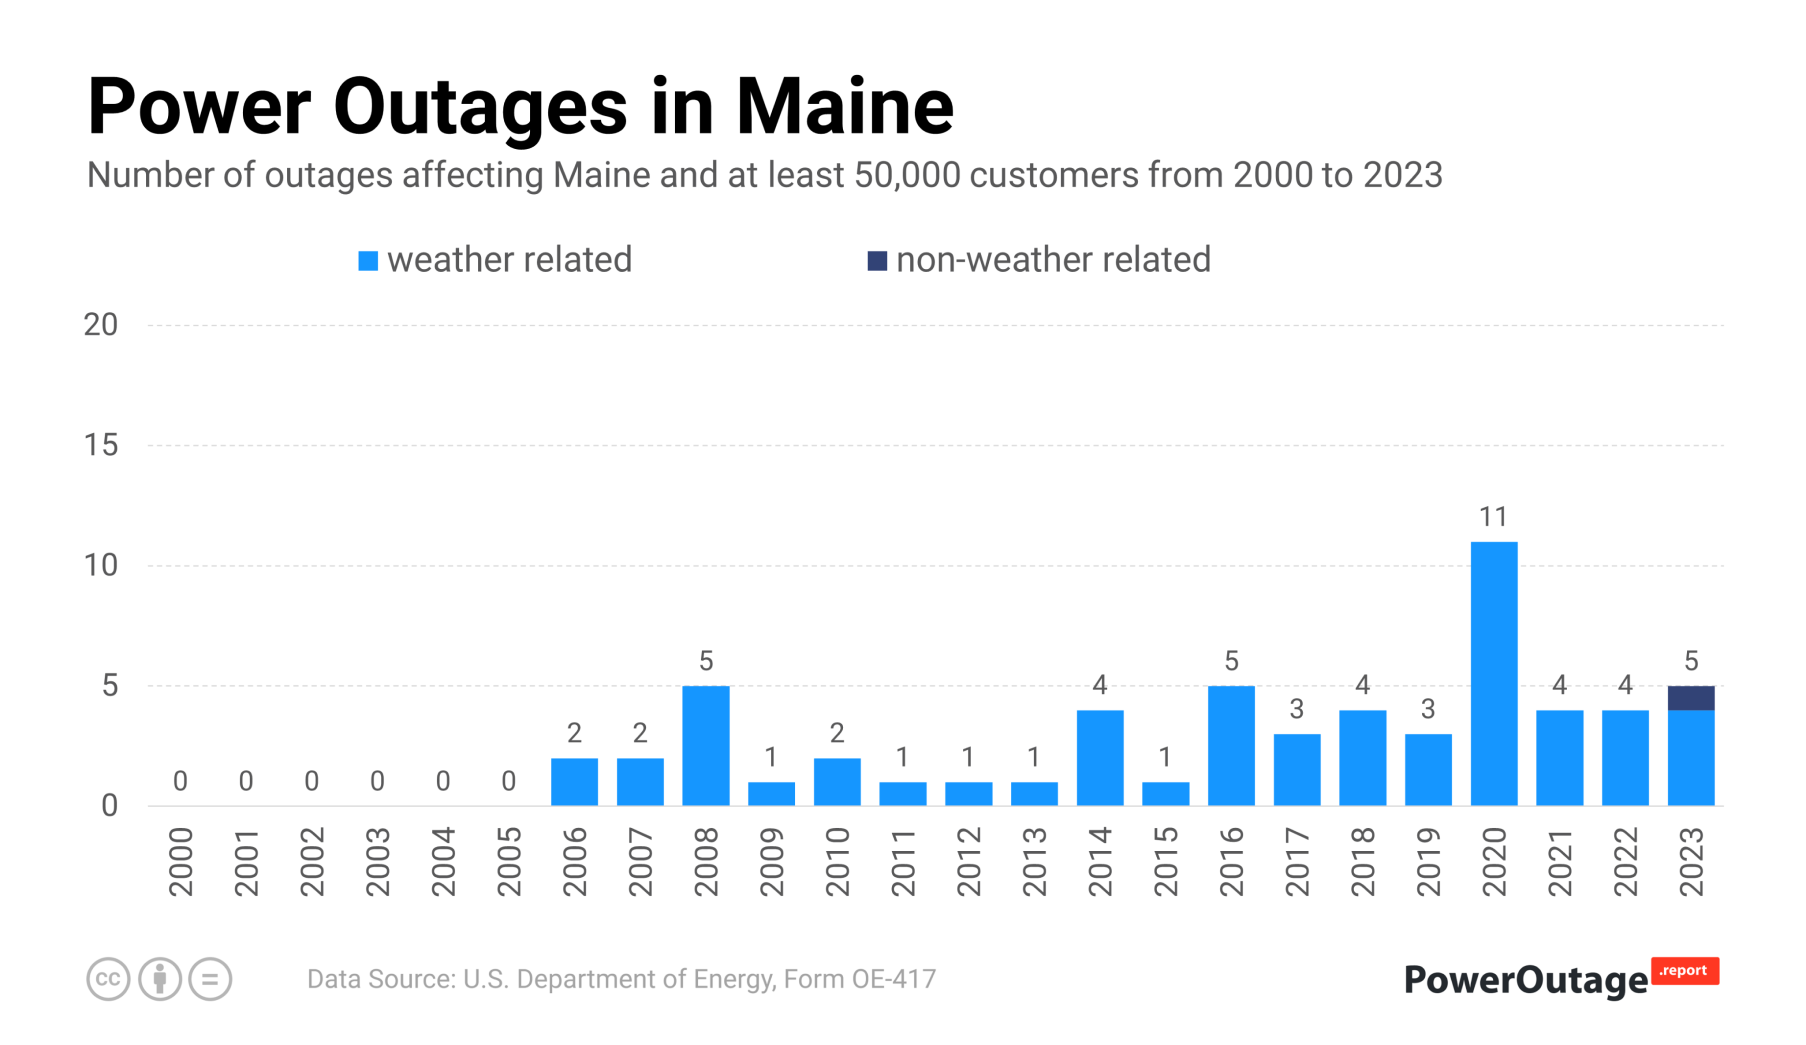 Maine Power Outage Statistics (2000 - 2021)